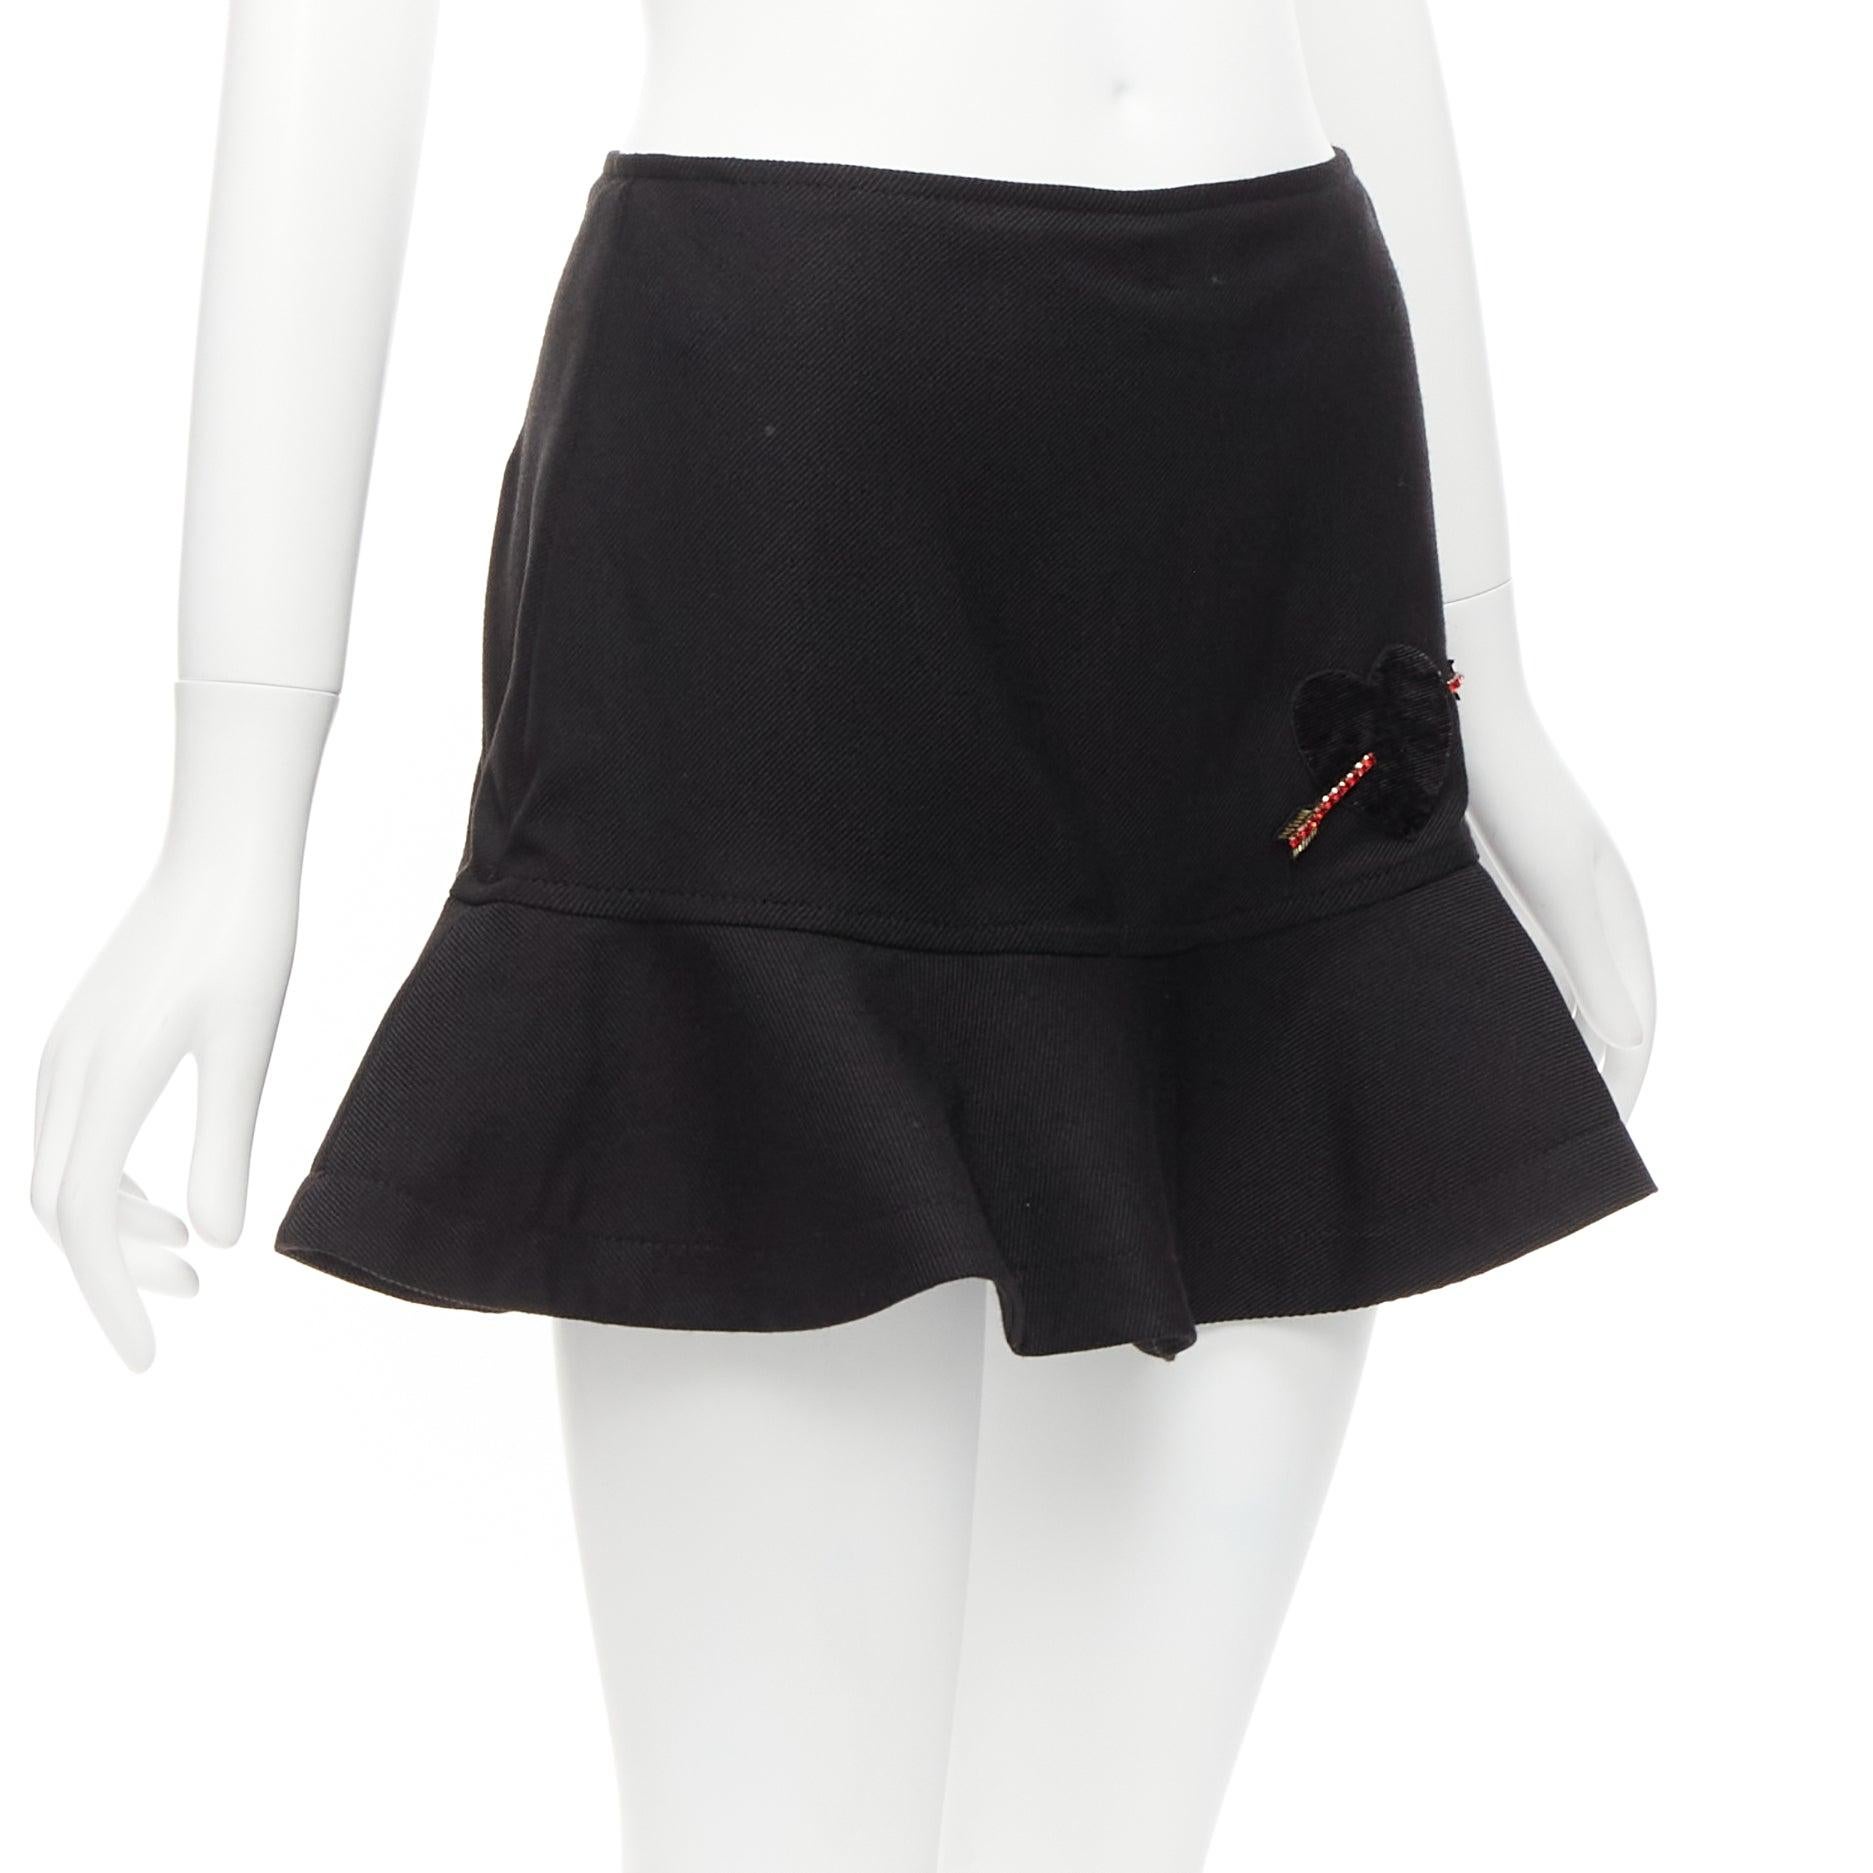 VALENTINO black virgin wool blend red bead Heart flared skirt shorts IT38 XS
Reference: AAWC/A00592
Brand: Valentino
Designer: Pier Paolo Piccioli
Material: Virgin Wool, Blend
Color: Black, Red
Pattern: Solid
Closure: Zip
Lining: Black Fabric
Extra